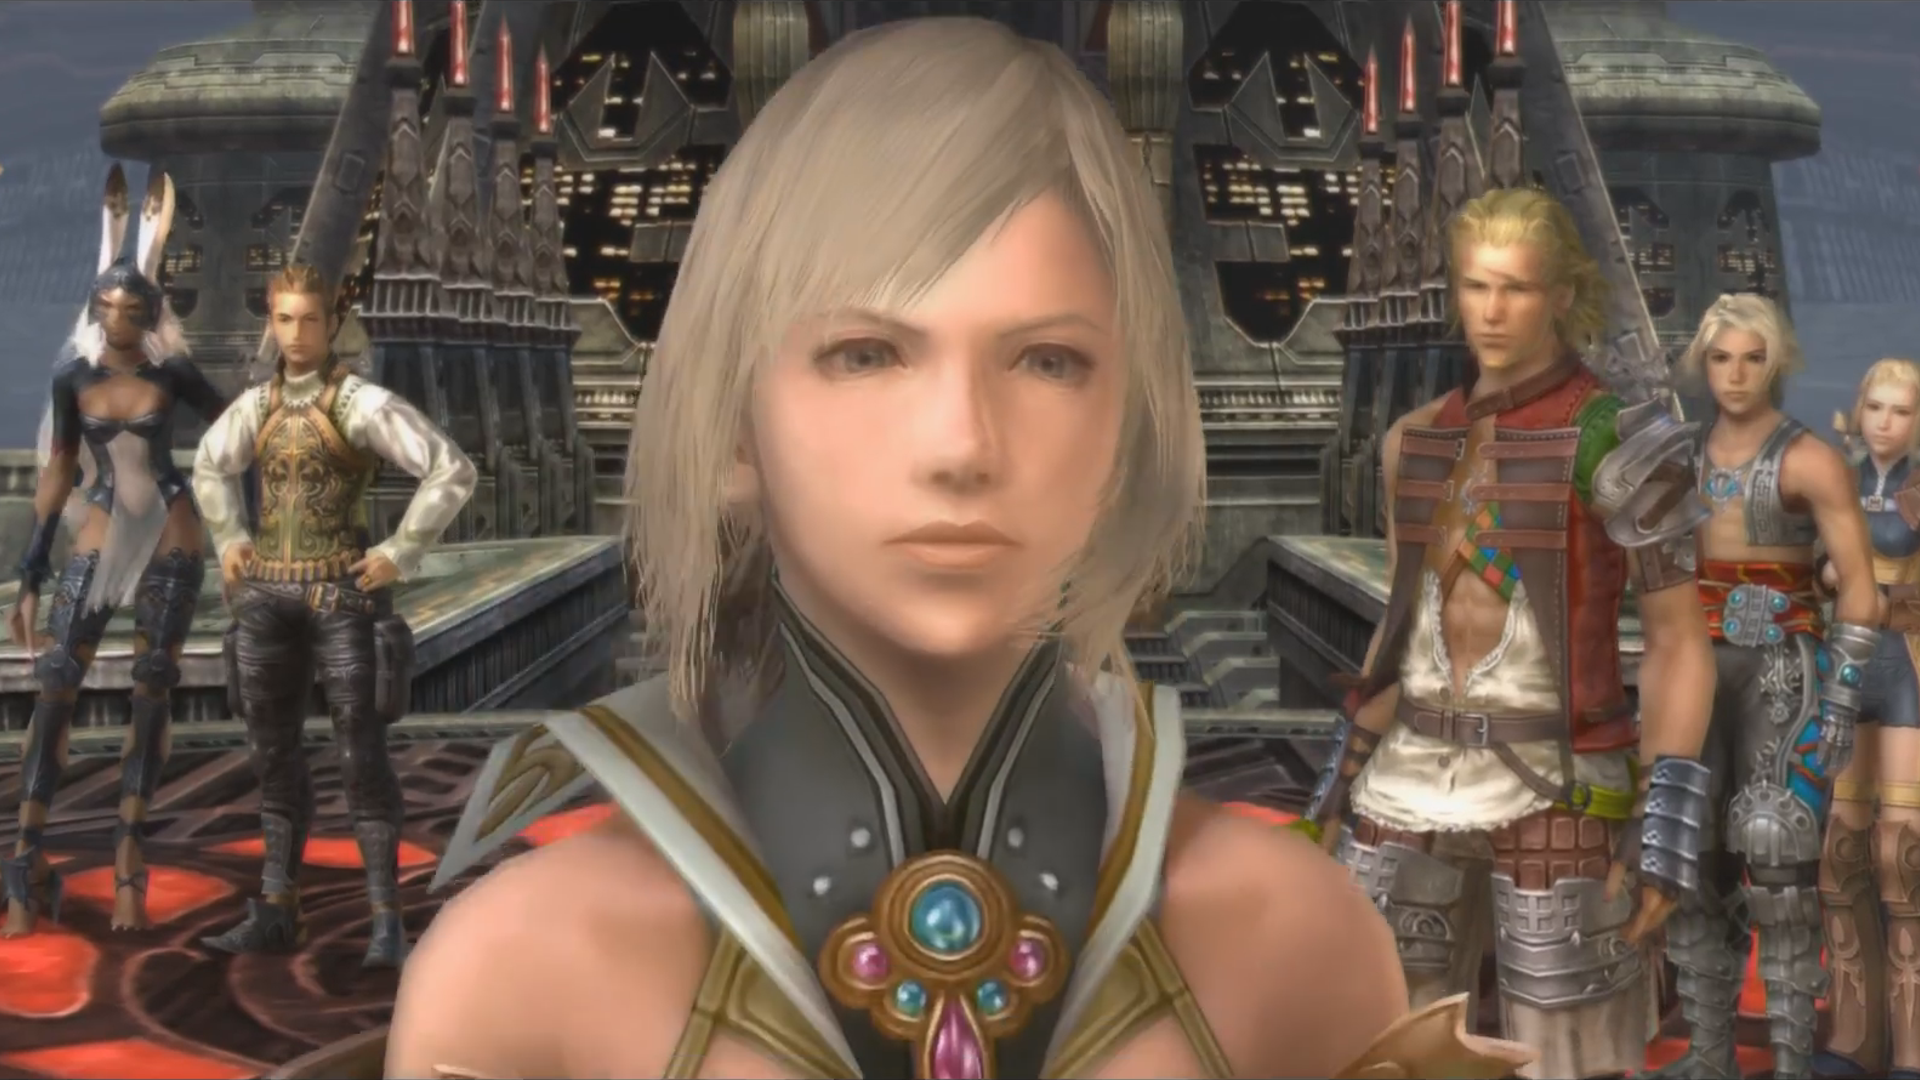 PS4 Exclusive Final Fantasy XII: The Zodiac Age Story Trailer Released.